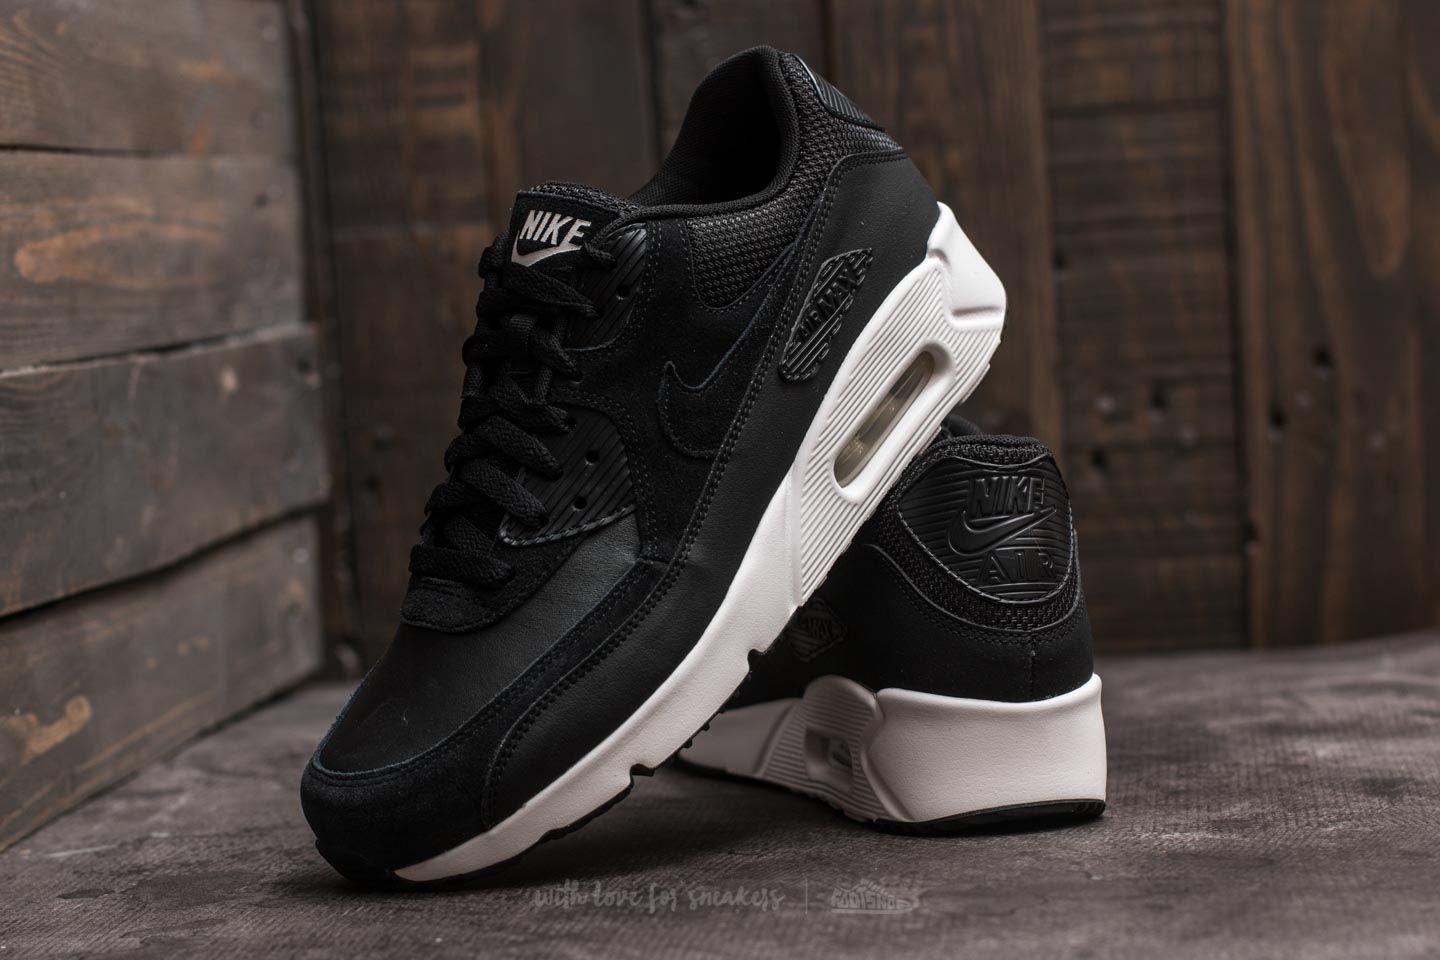 Nike Air Max 90 Ultra 2.0 Leather Black/ Black for Men - Lyst